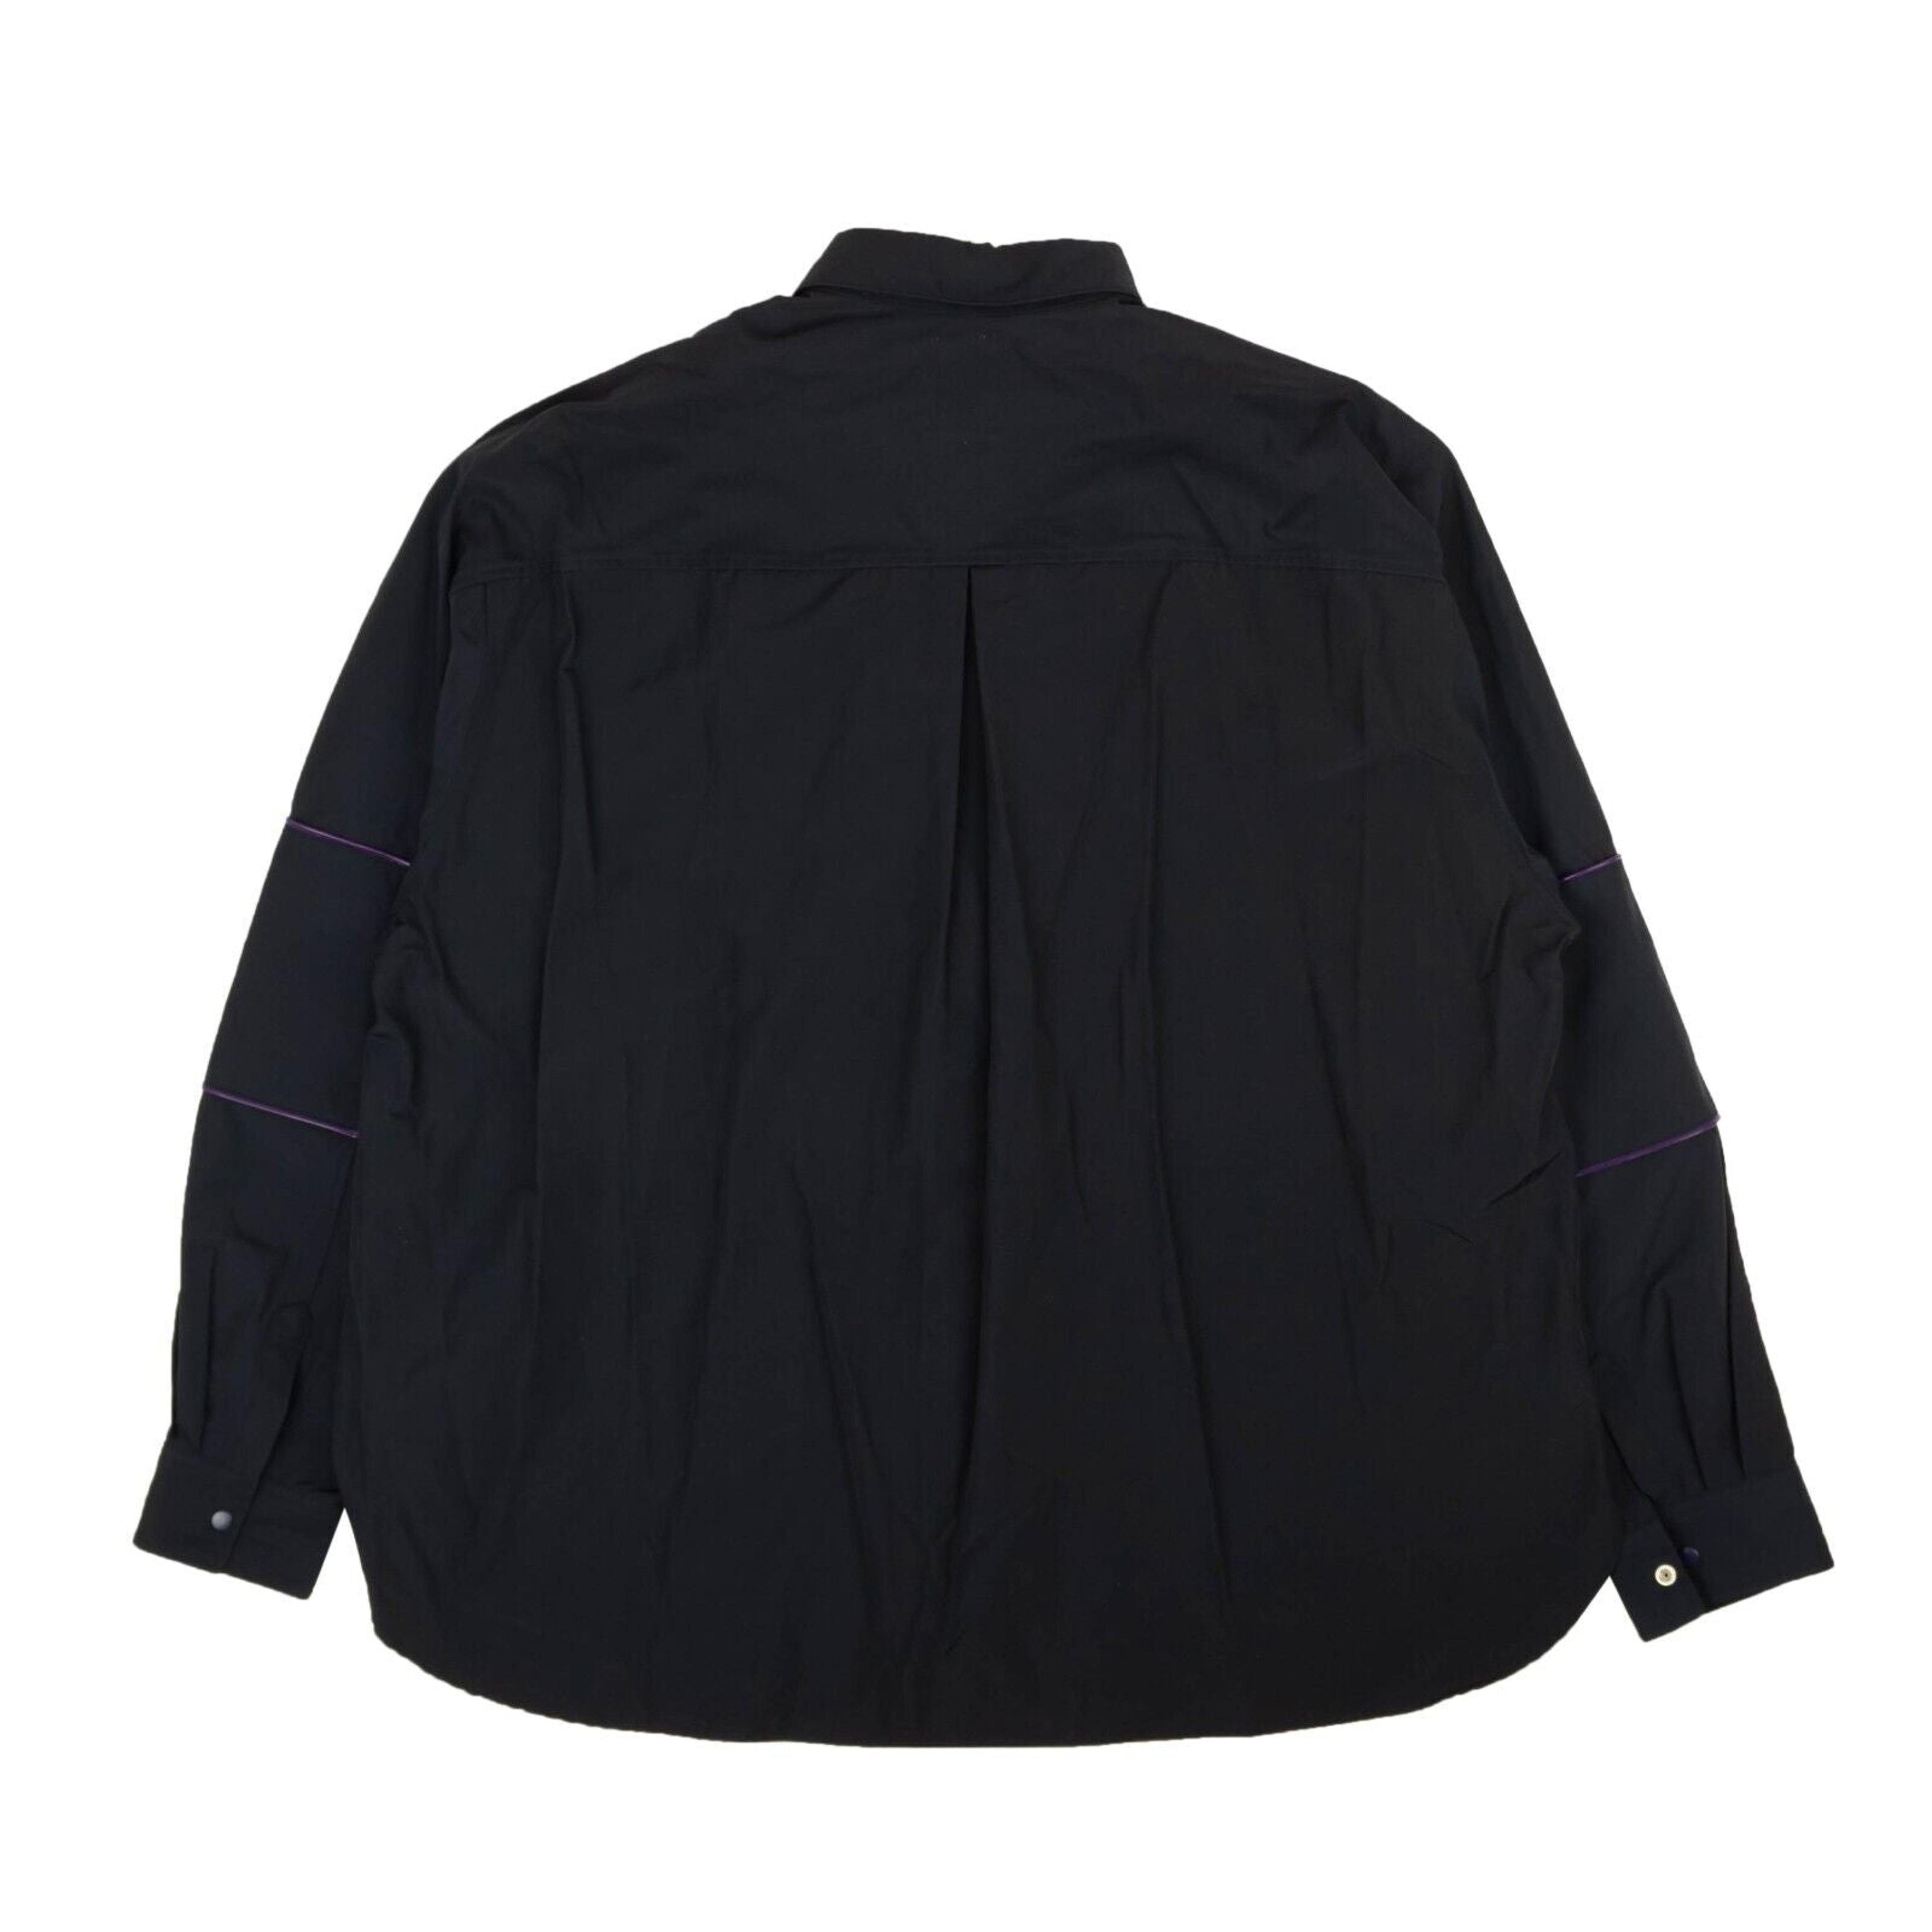 Alternate View 2 of Name Snap Front Overshirt - Blue